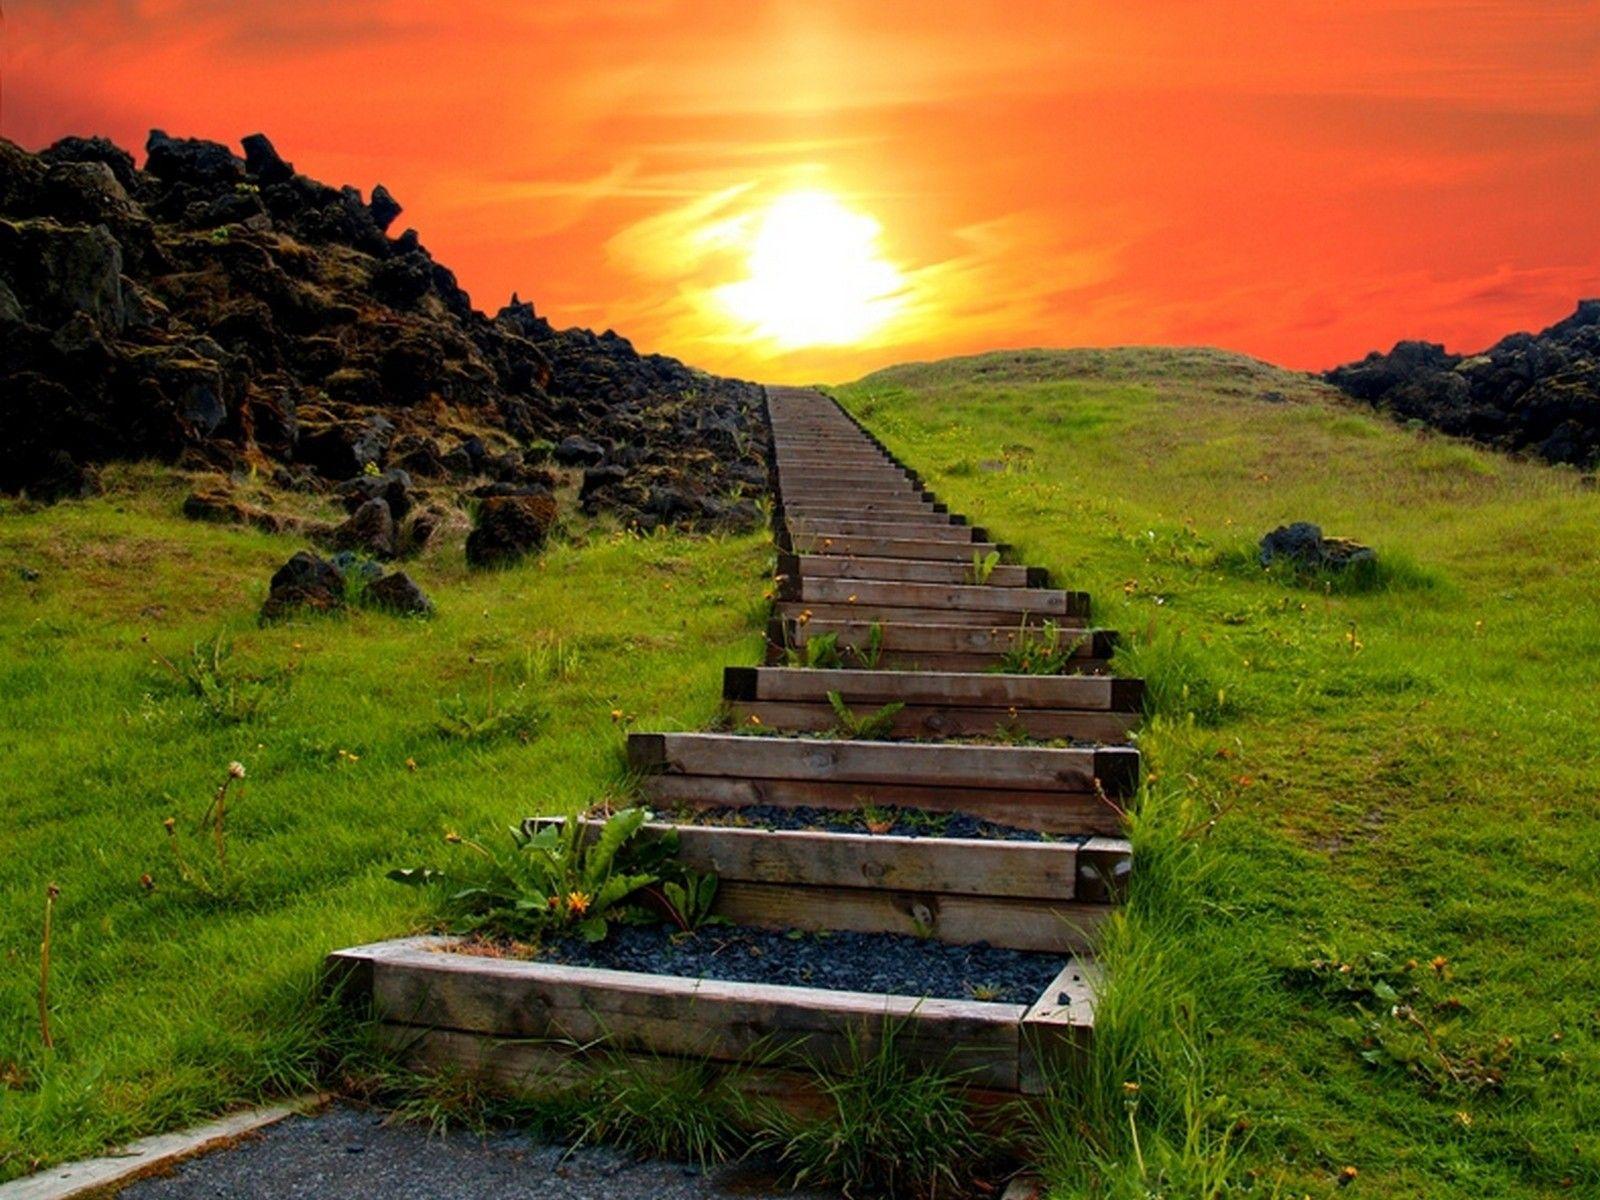 The stairs leading to the sun wallpaper and image